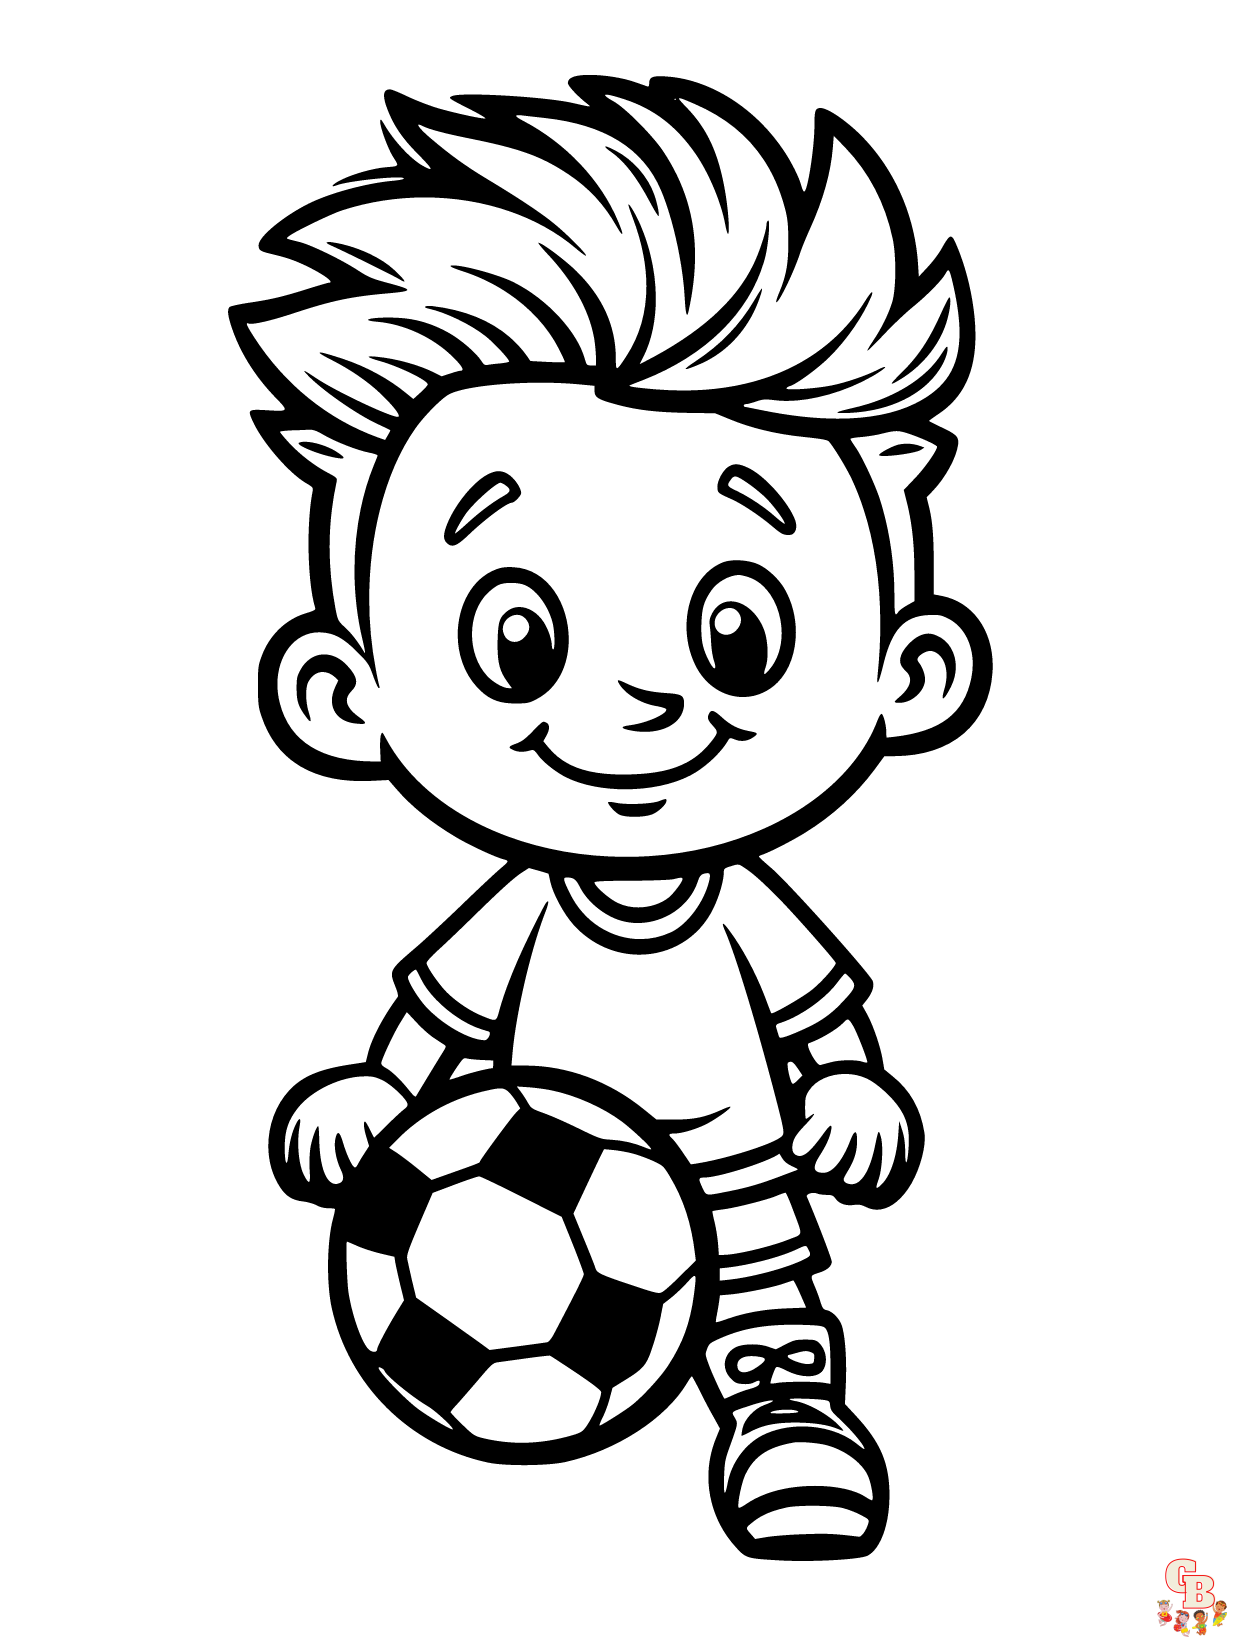 Soccer coloring pages free printable sheets for kids